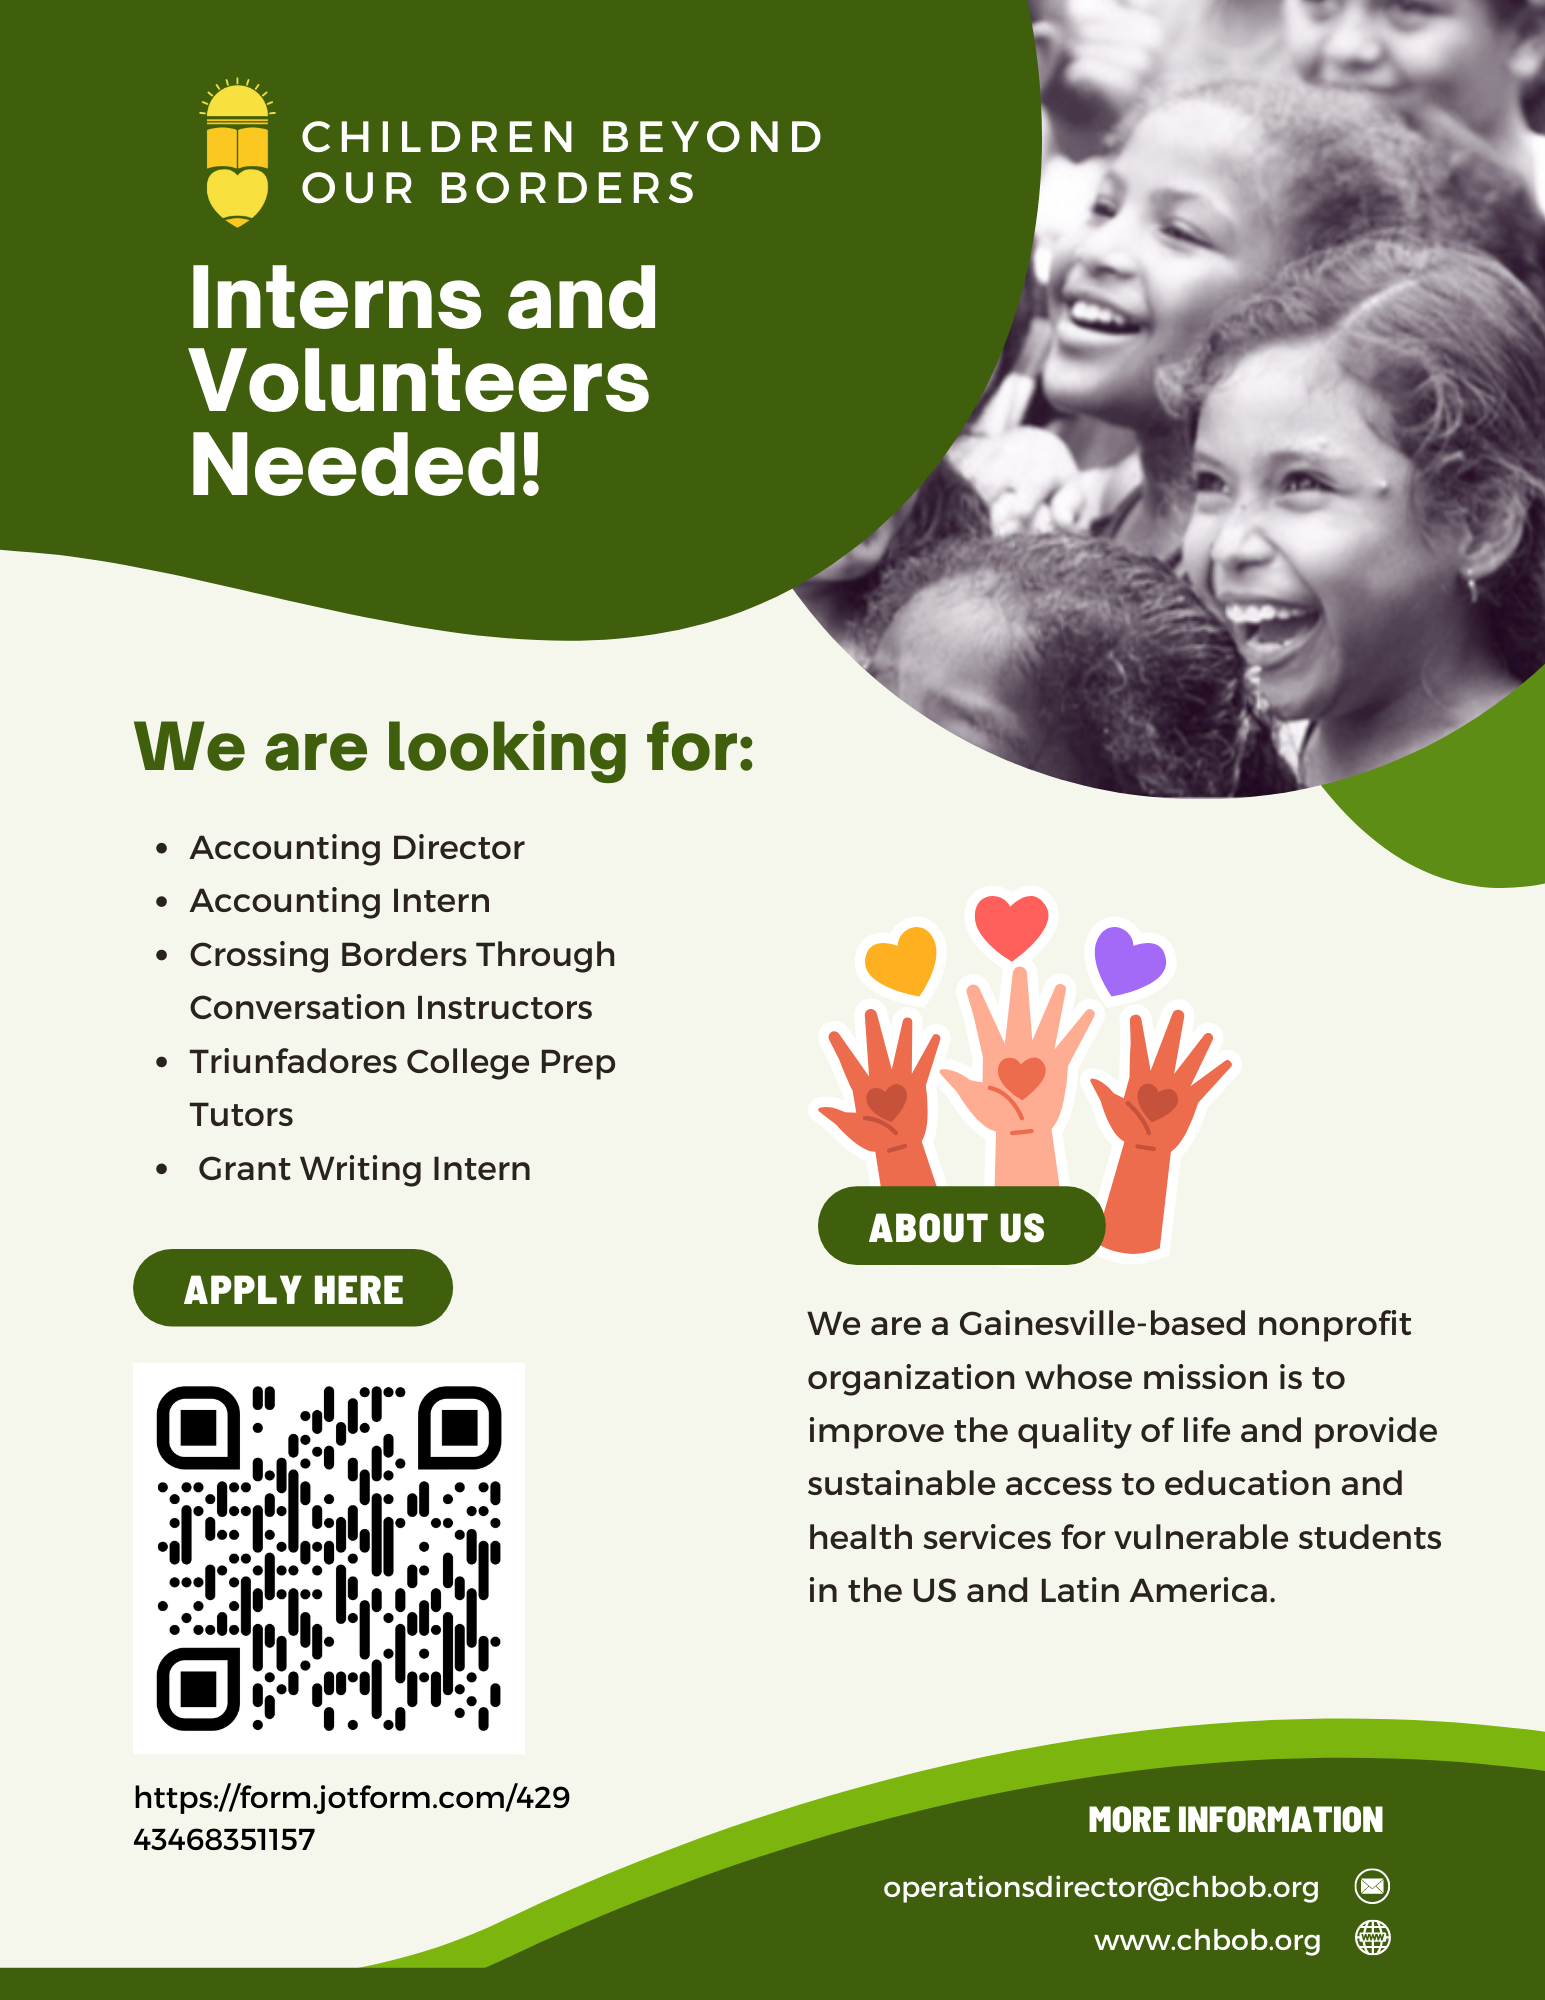 Children Beyond Our Borders - Interns and Volunteers Needed